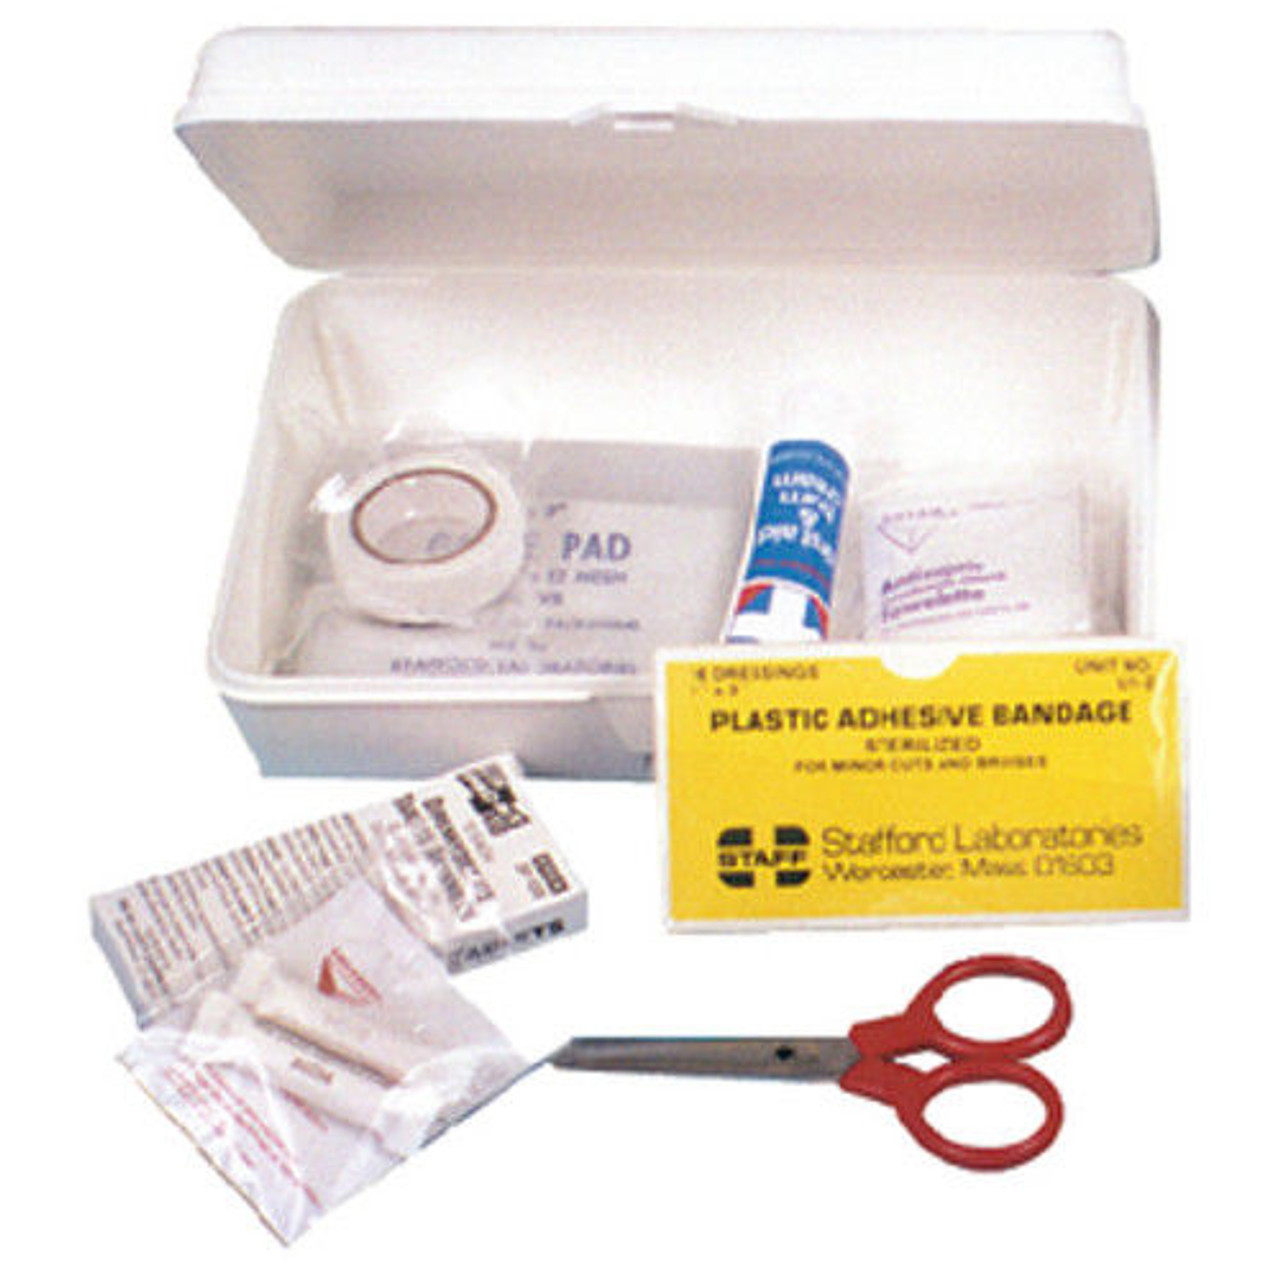 Basic First Aid Kit for Boats, RVs, Camping, Home and More